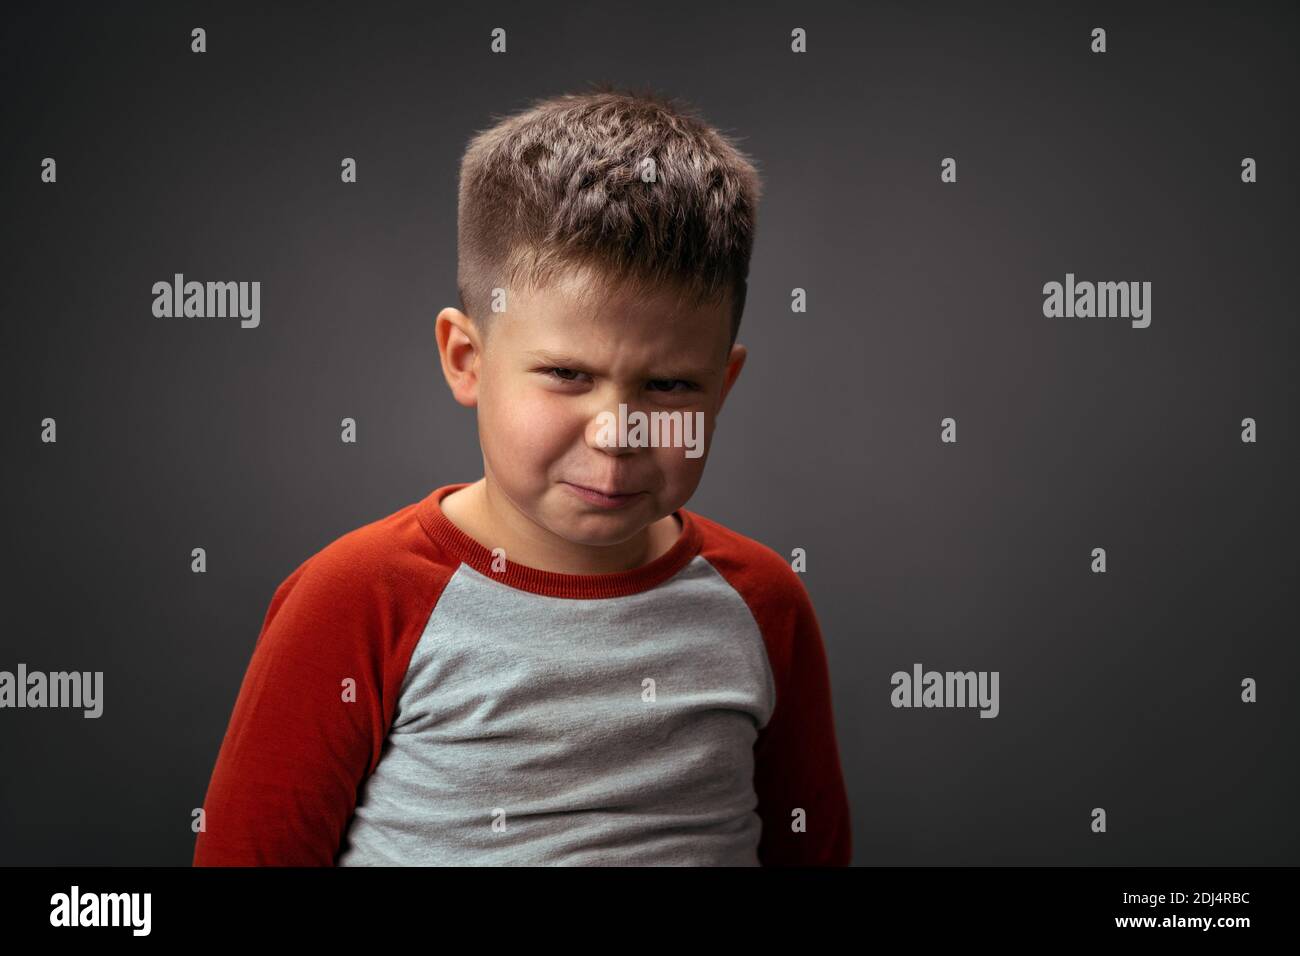 Angry boy frowning, showing with his face dislike isolated on grey background. Fake child emotions. Human emotions, facial expression concept. Facial Stock Photo